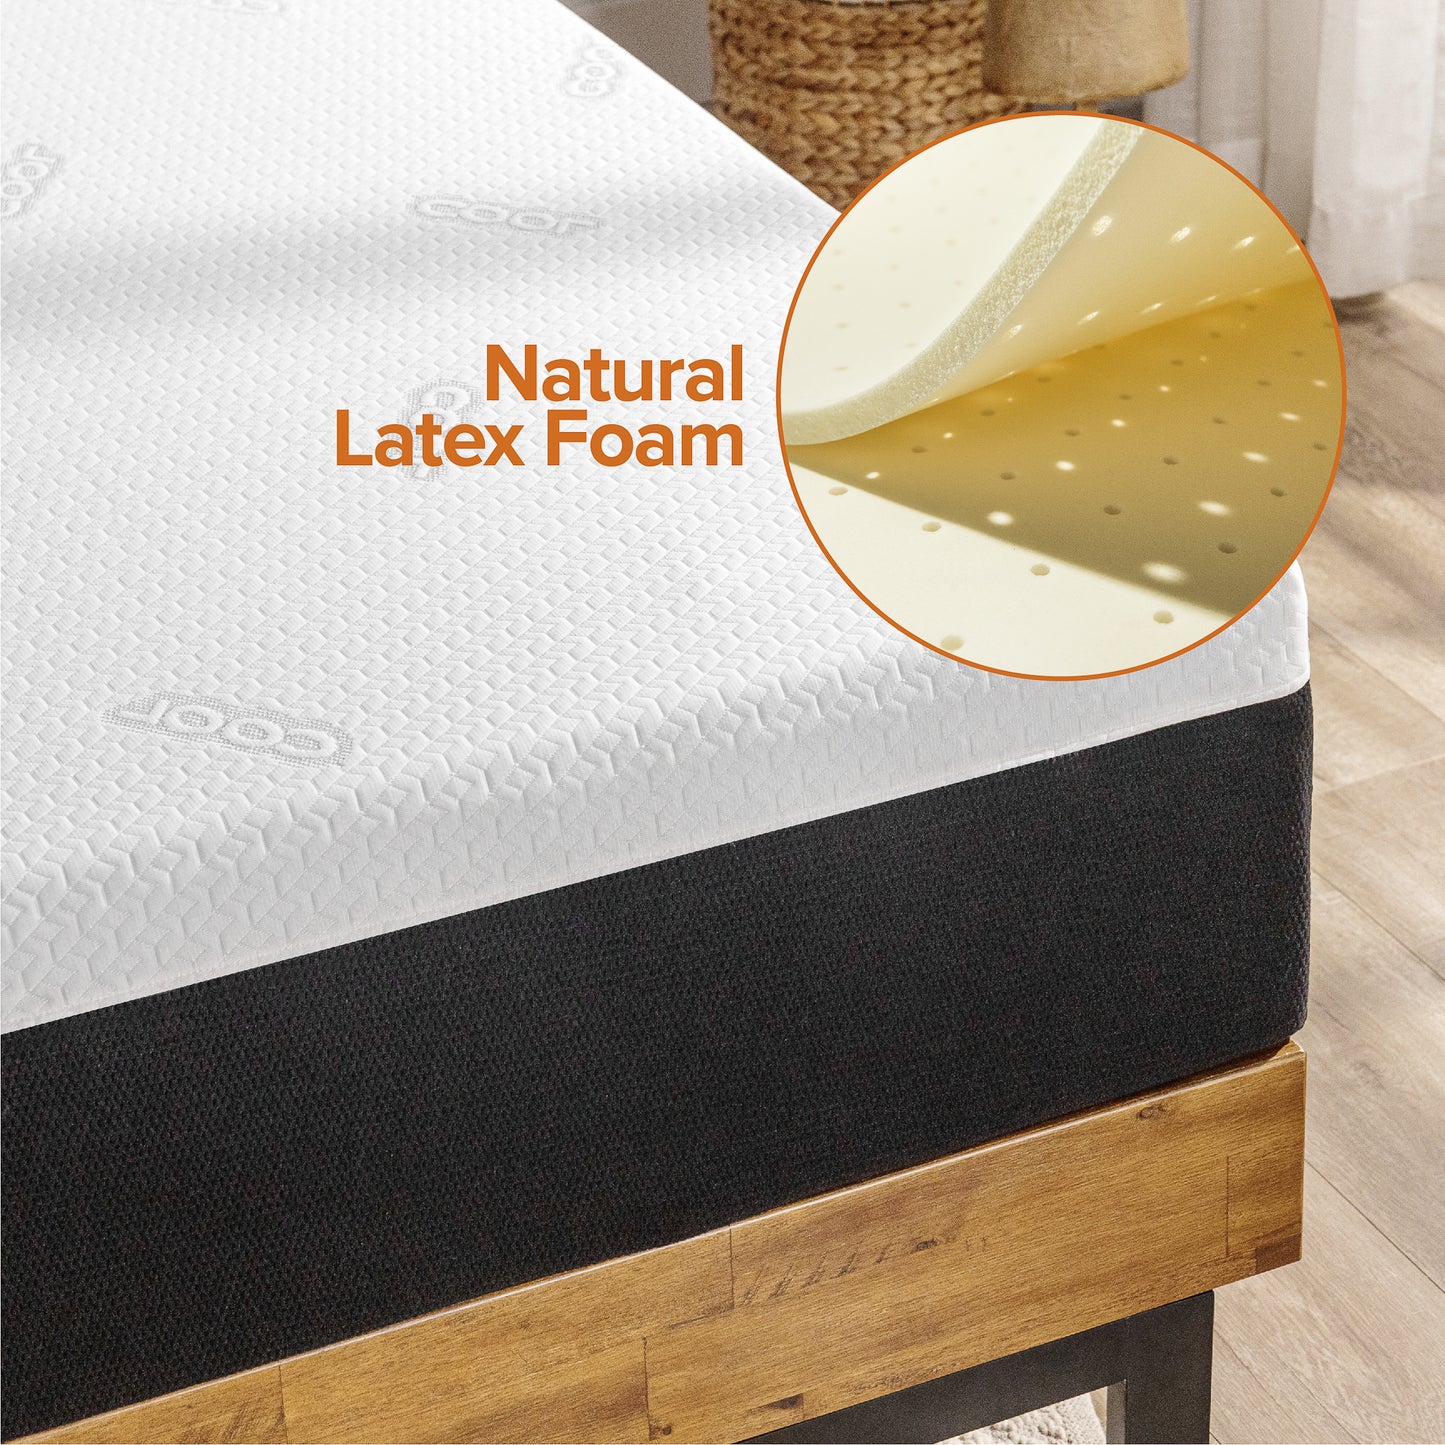 Tilam UltraCool Series iCoil 2.0 Natural Latex Smooth Top Mattress With Edge Support (Cool Fabric) 12" [Clearance]